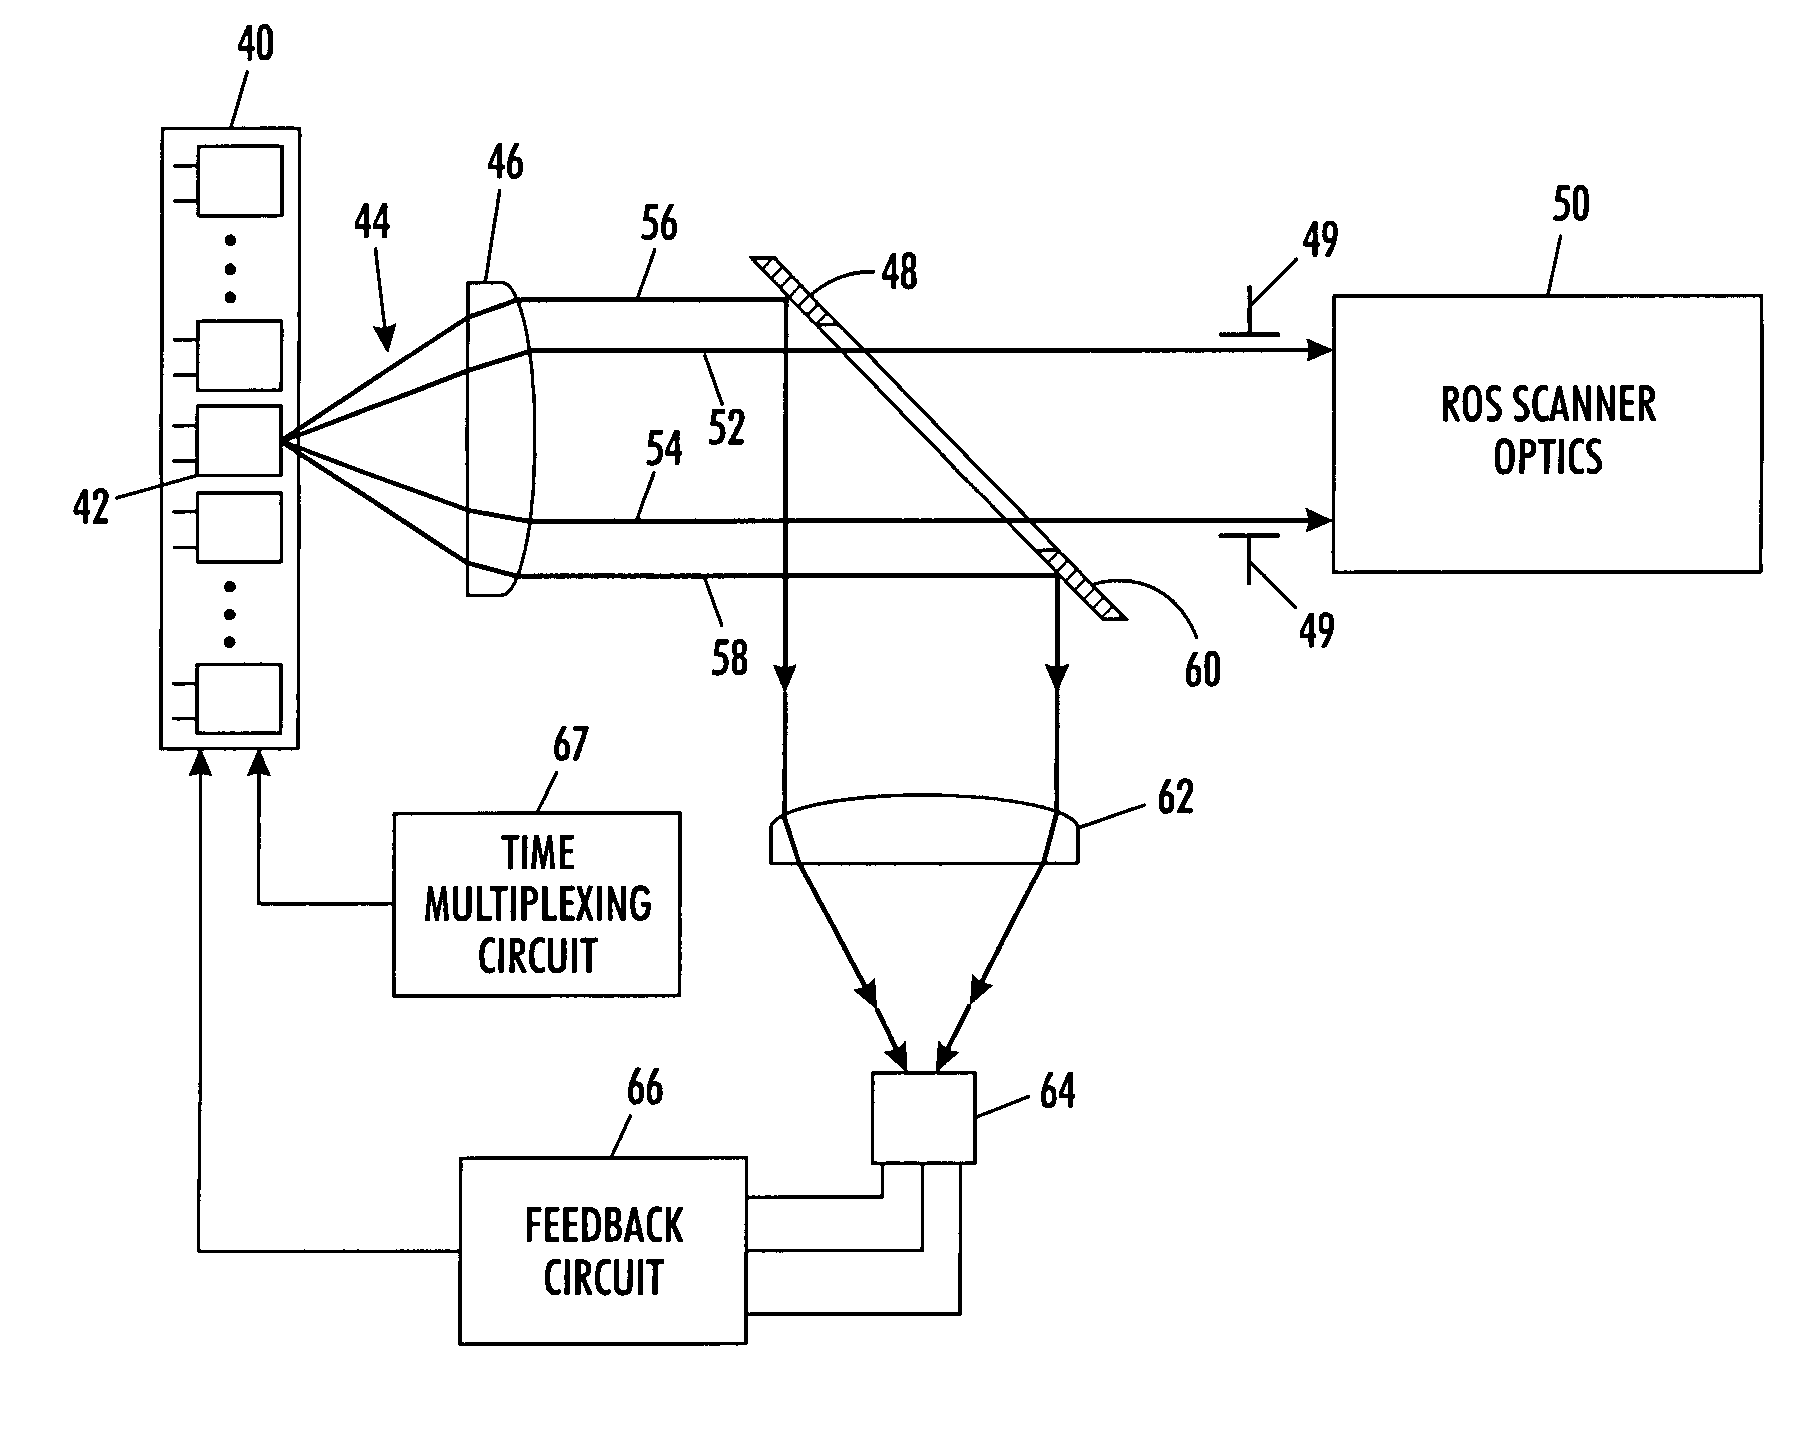 Method and apparatus for monitoring and controlling laser intensity in a ROS scanning system